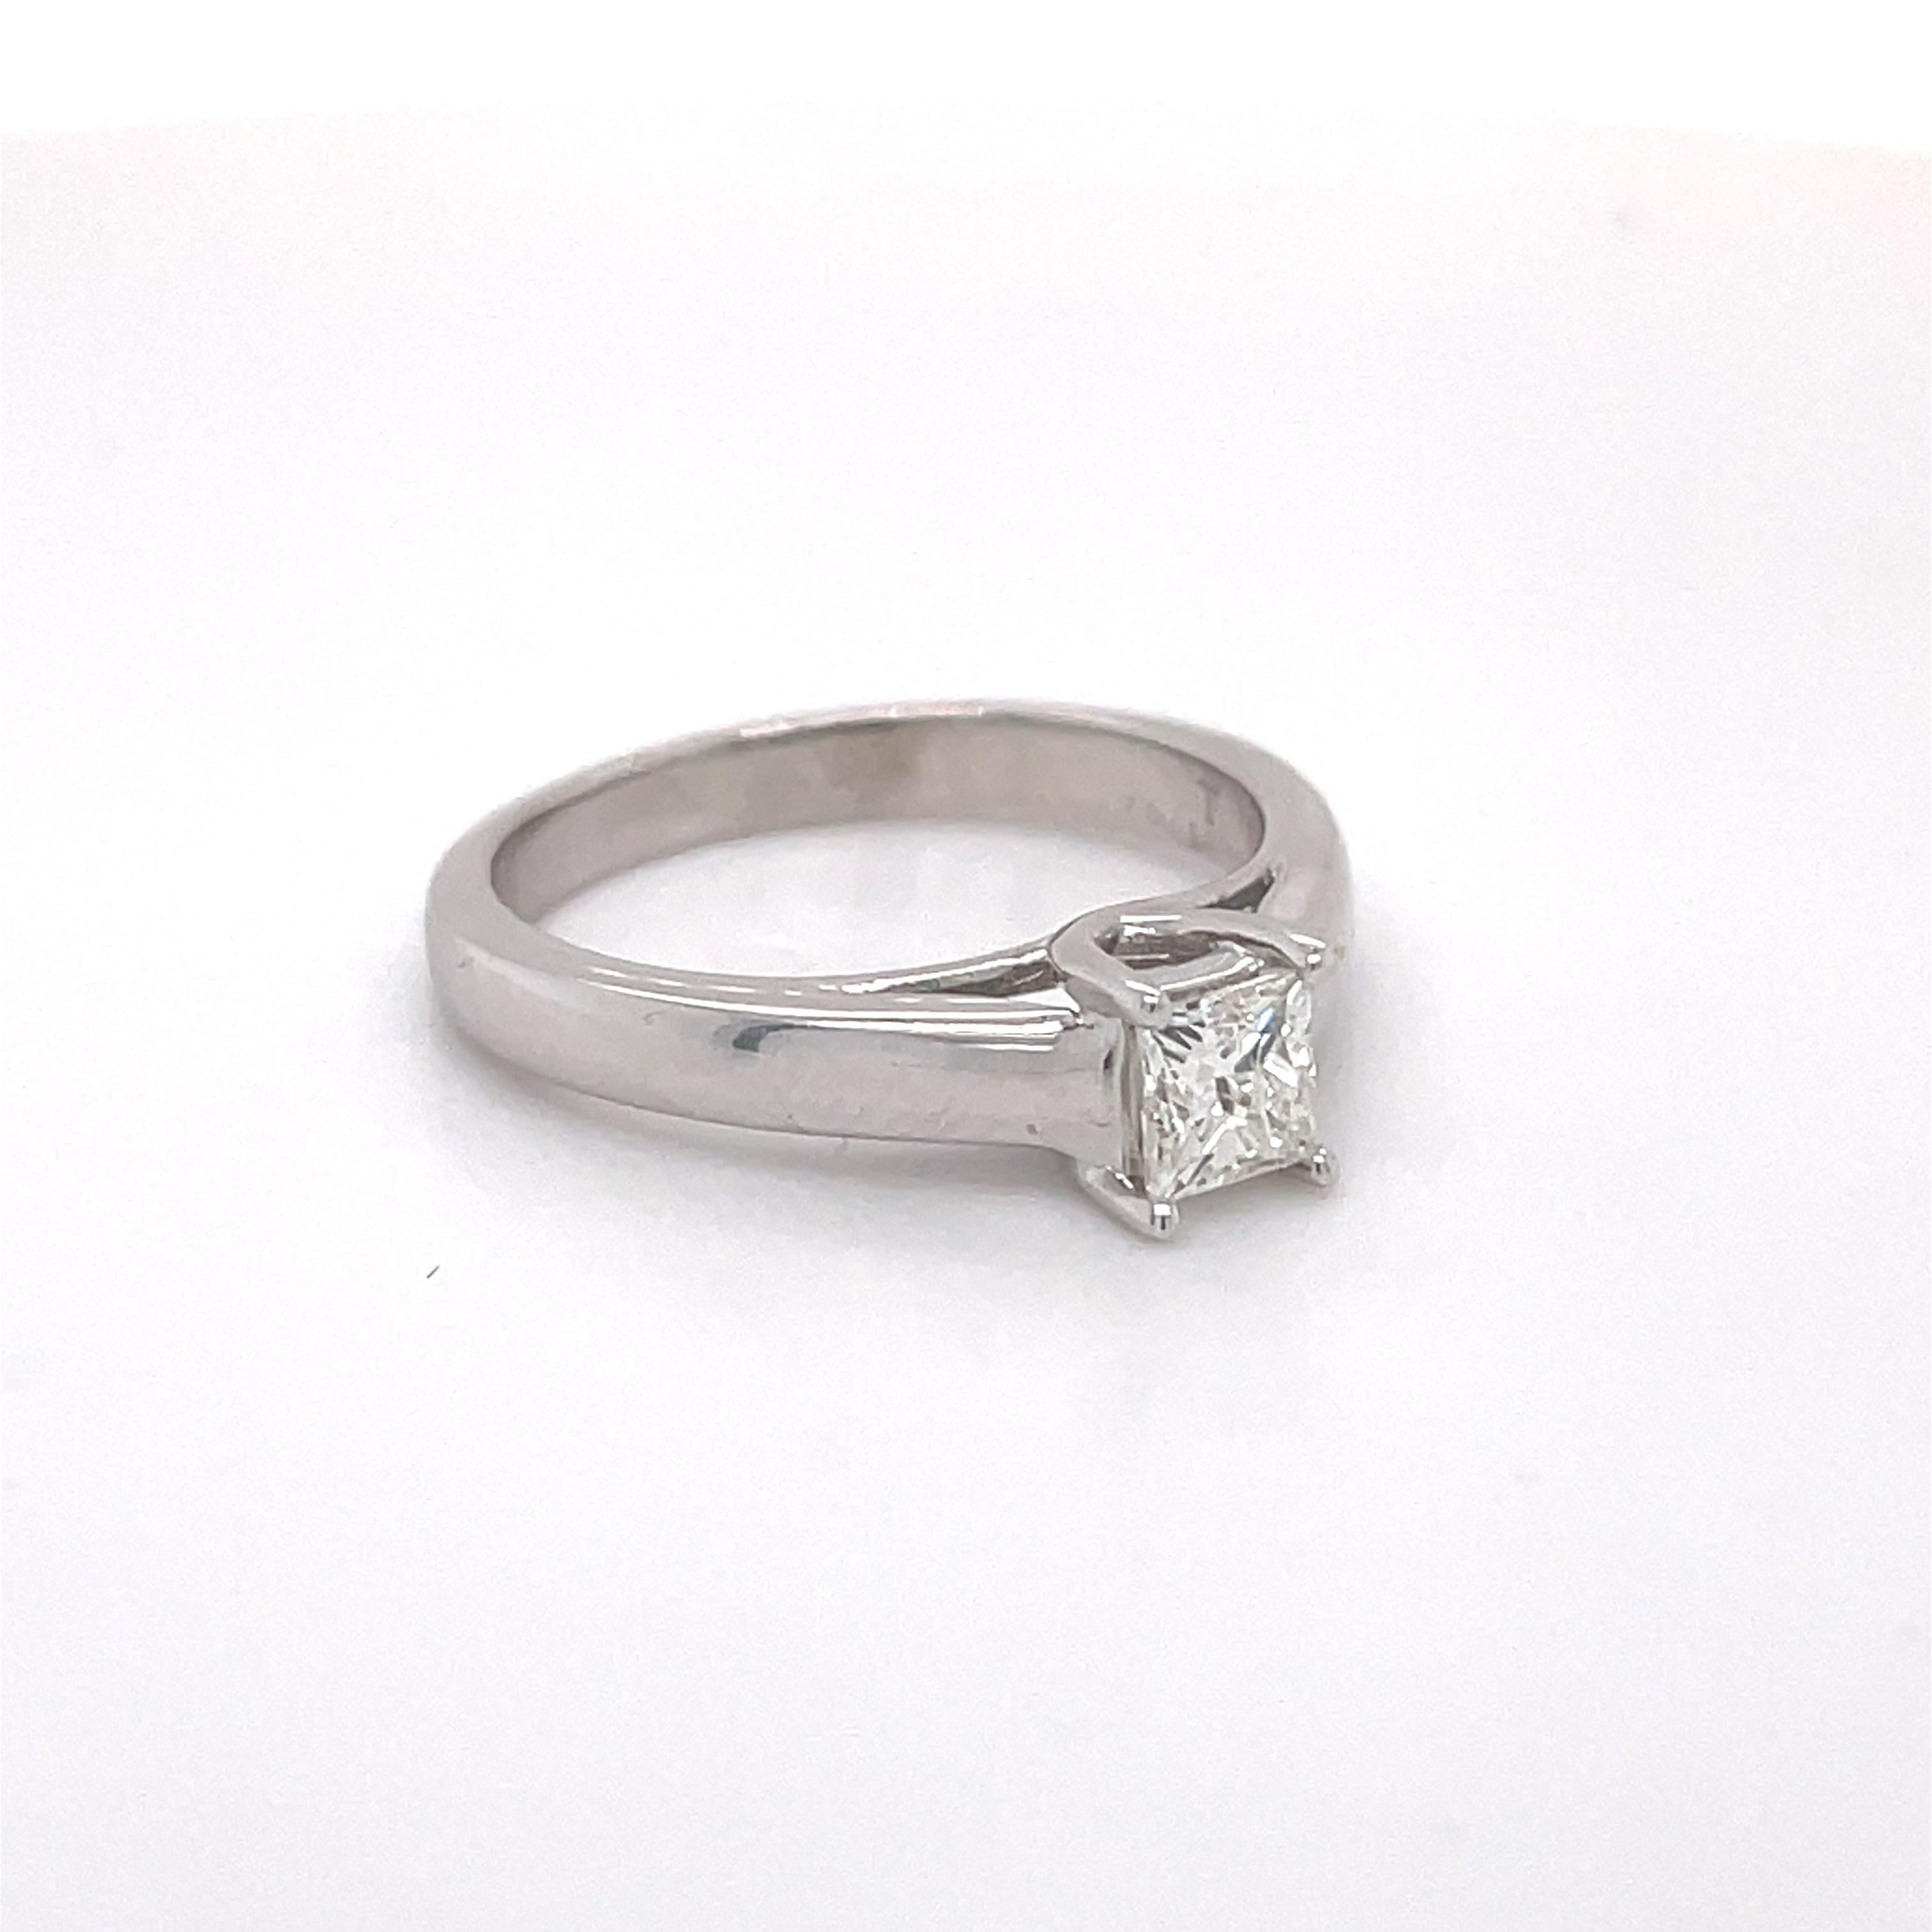 Tolkowsky Jewelry ring, Engagement Ring, 0.5CT Princess Diamond, 14k White Gold In Excellent Condition For Sale In Ramat Gan, IL